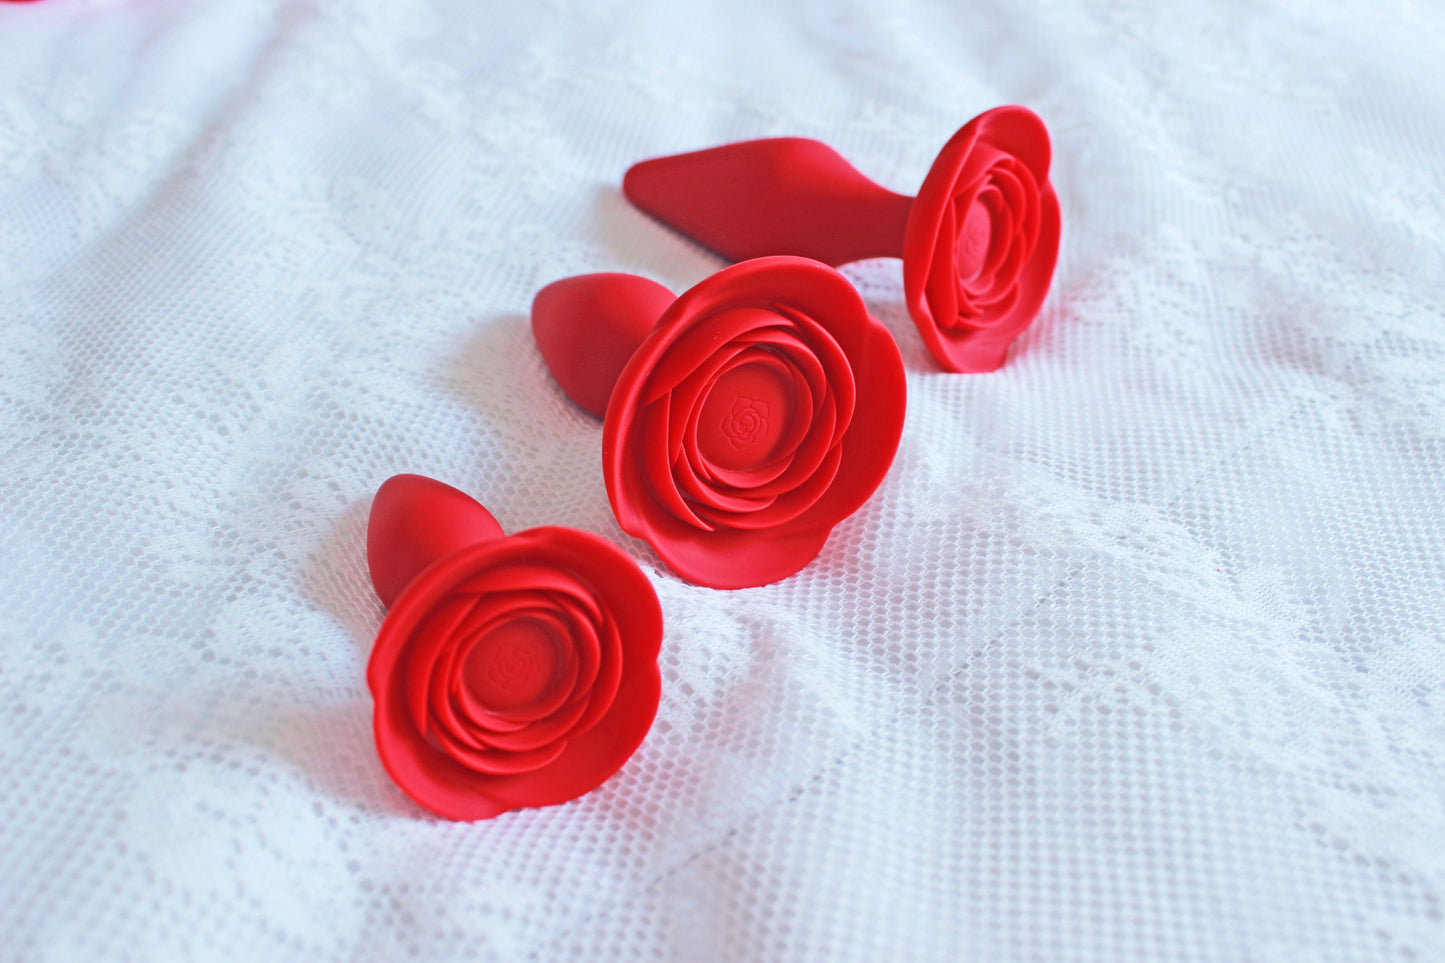 3 red rose silicone anal trainer butt plugs on a white lace blanket